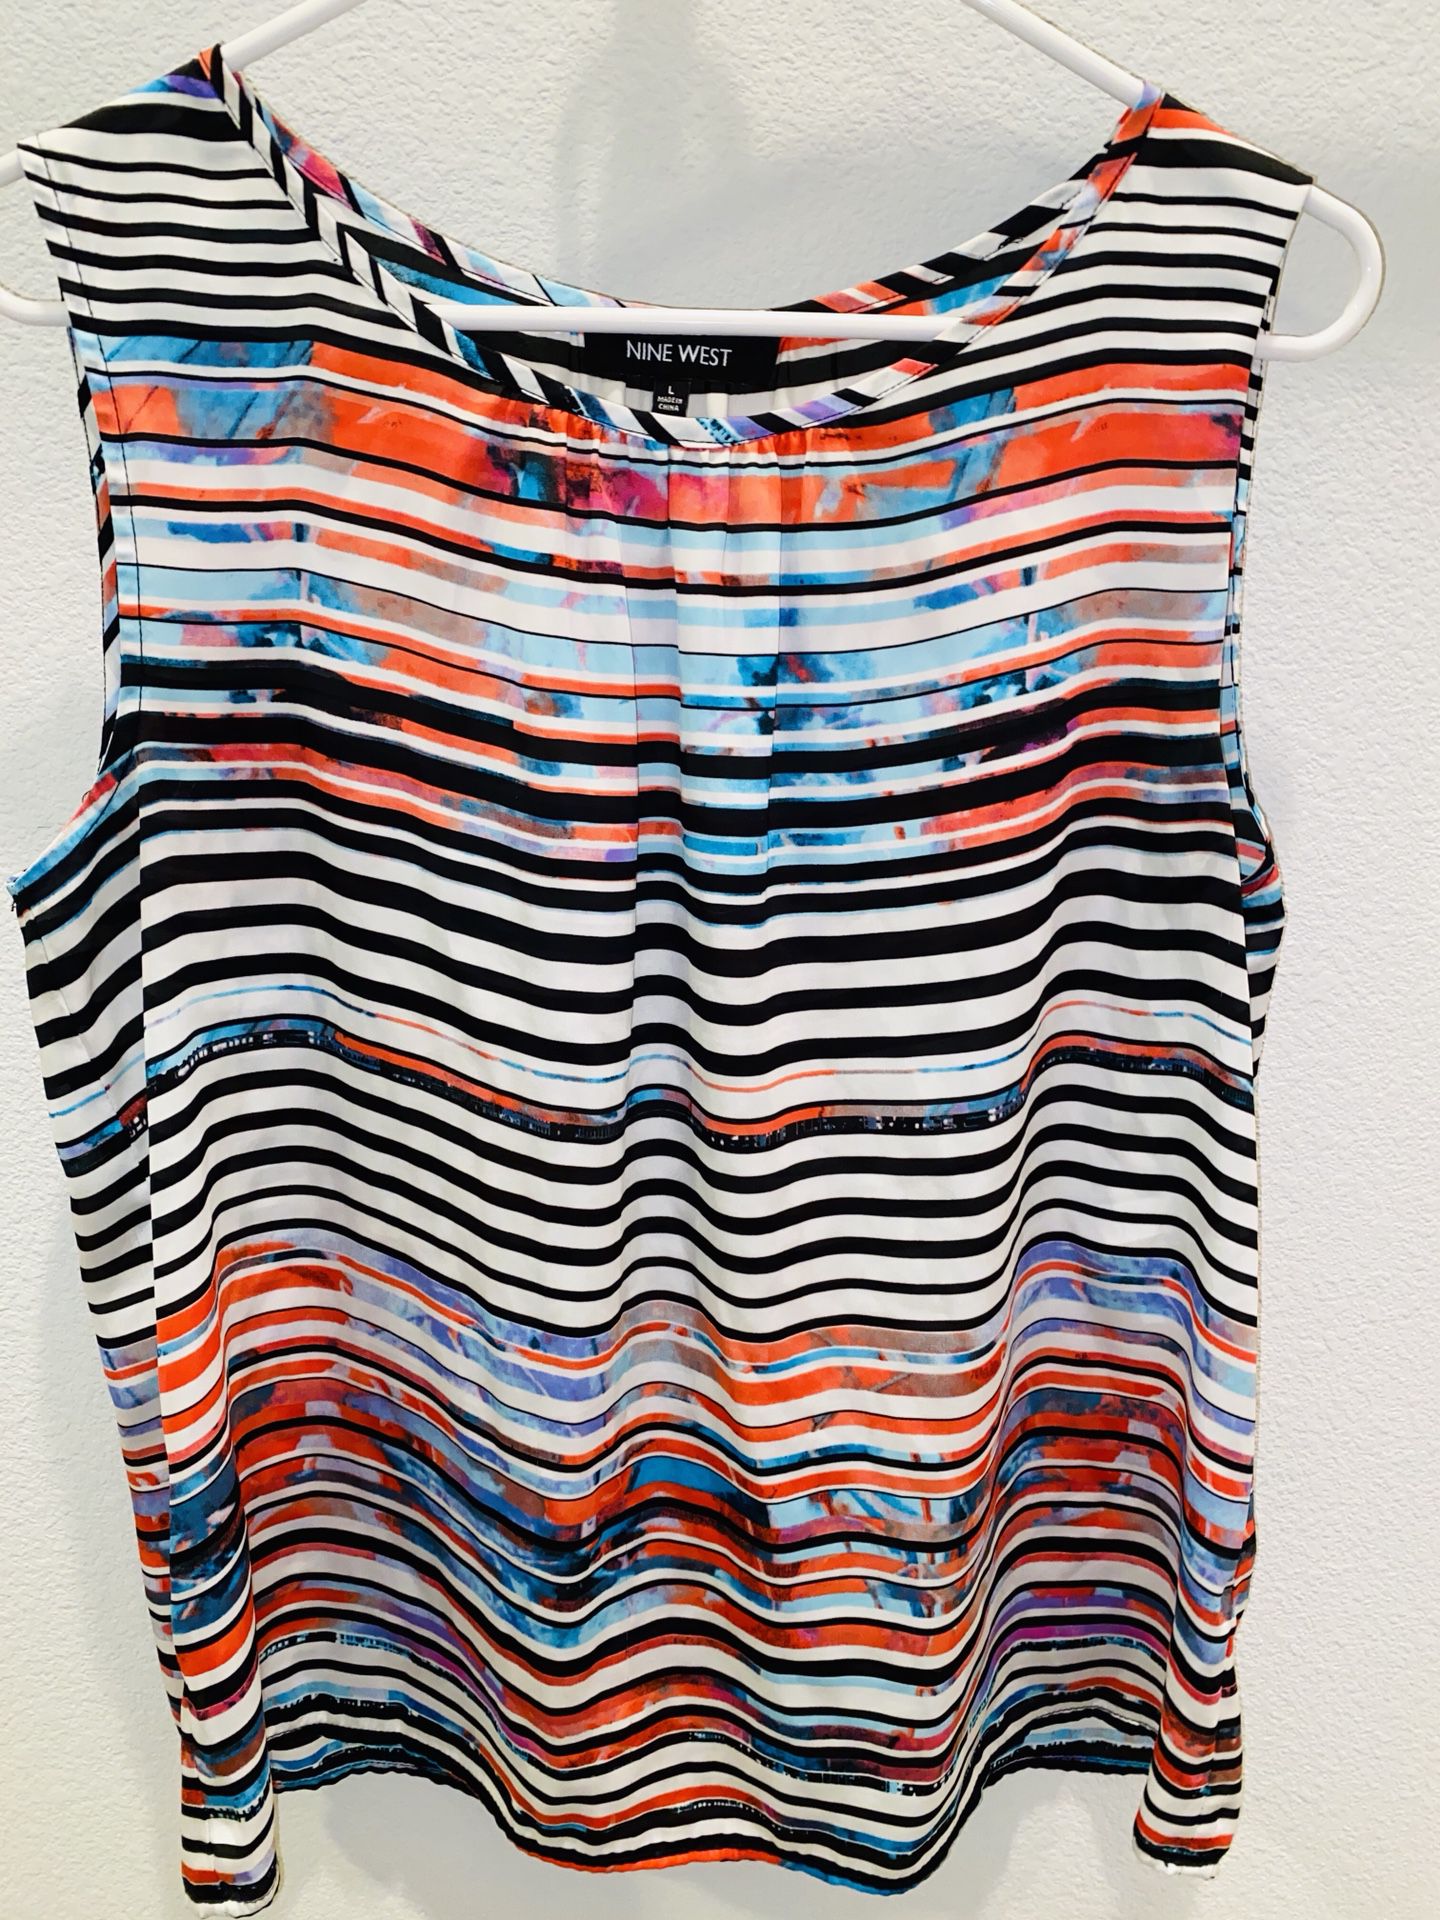 Nine West shell top - size L